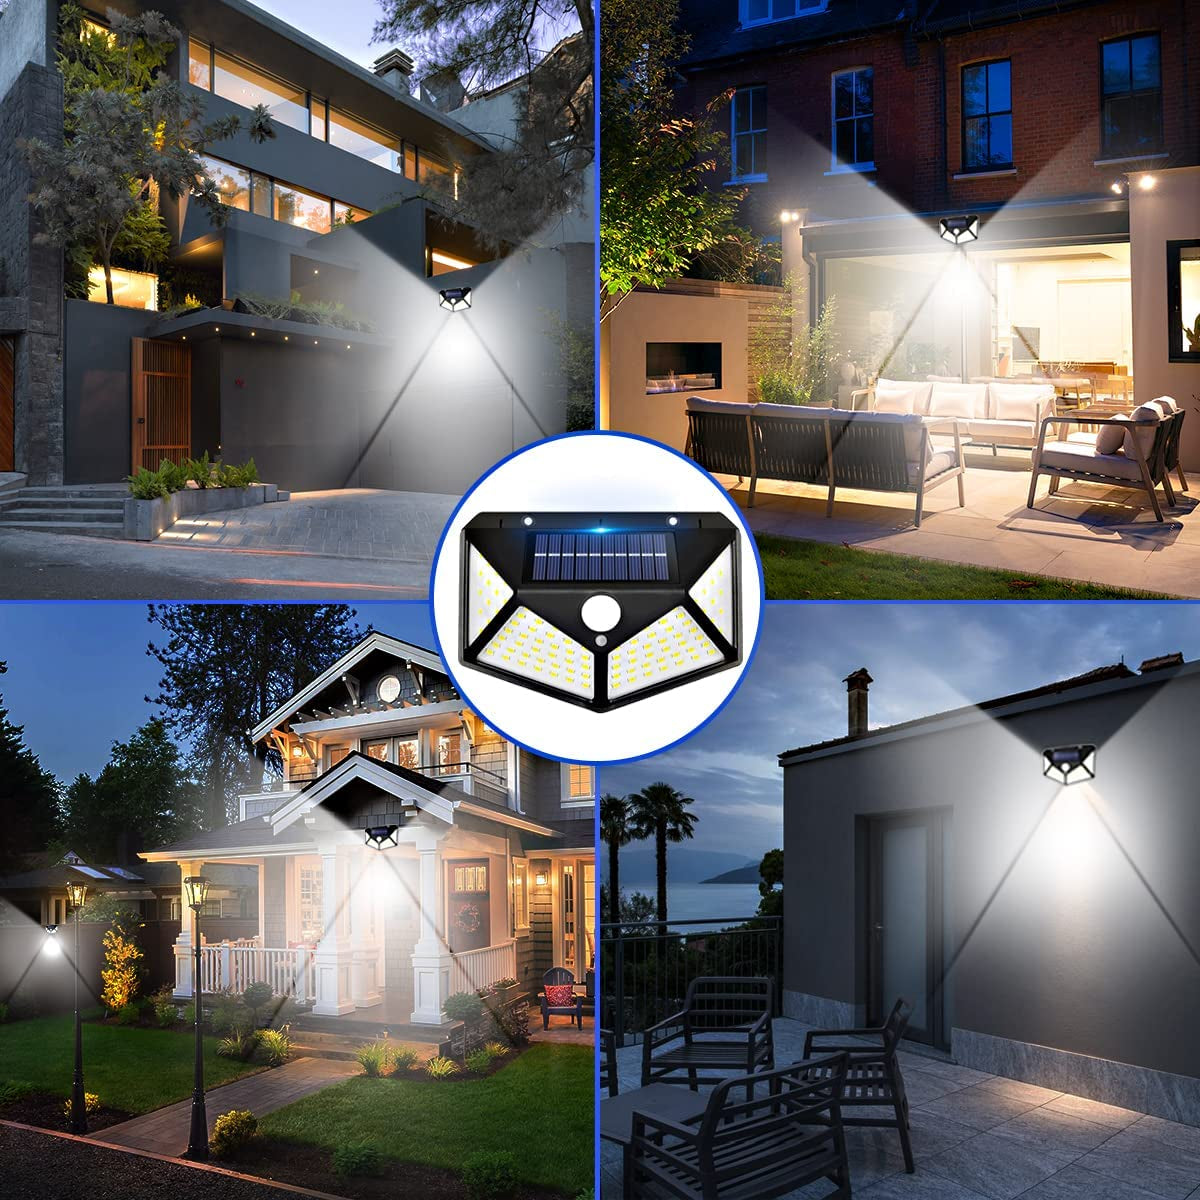 2 Pack Outdoor Solar Wall Light, 100 LEDs with Lights Reflector, 270°Wide Angle, IP65 Waterproof, Motion Sensor Security Lights for Exterior Wall, Patio, Yard, Garage, Deck, Garden